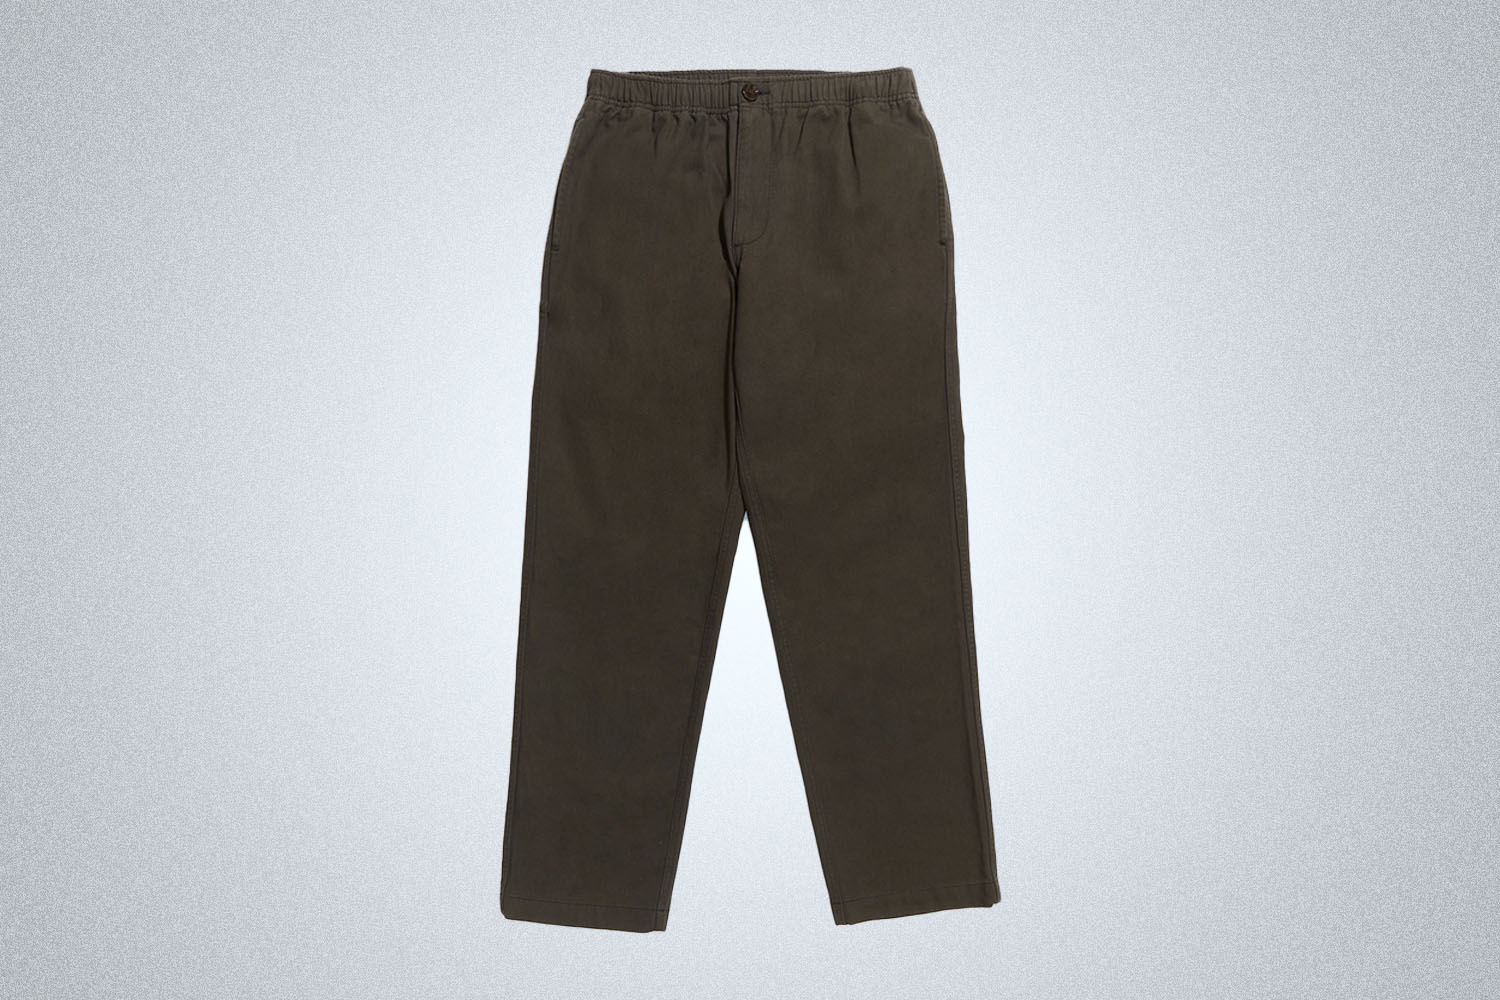 a pair of olive pants 